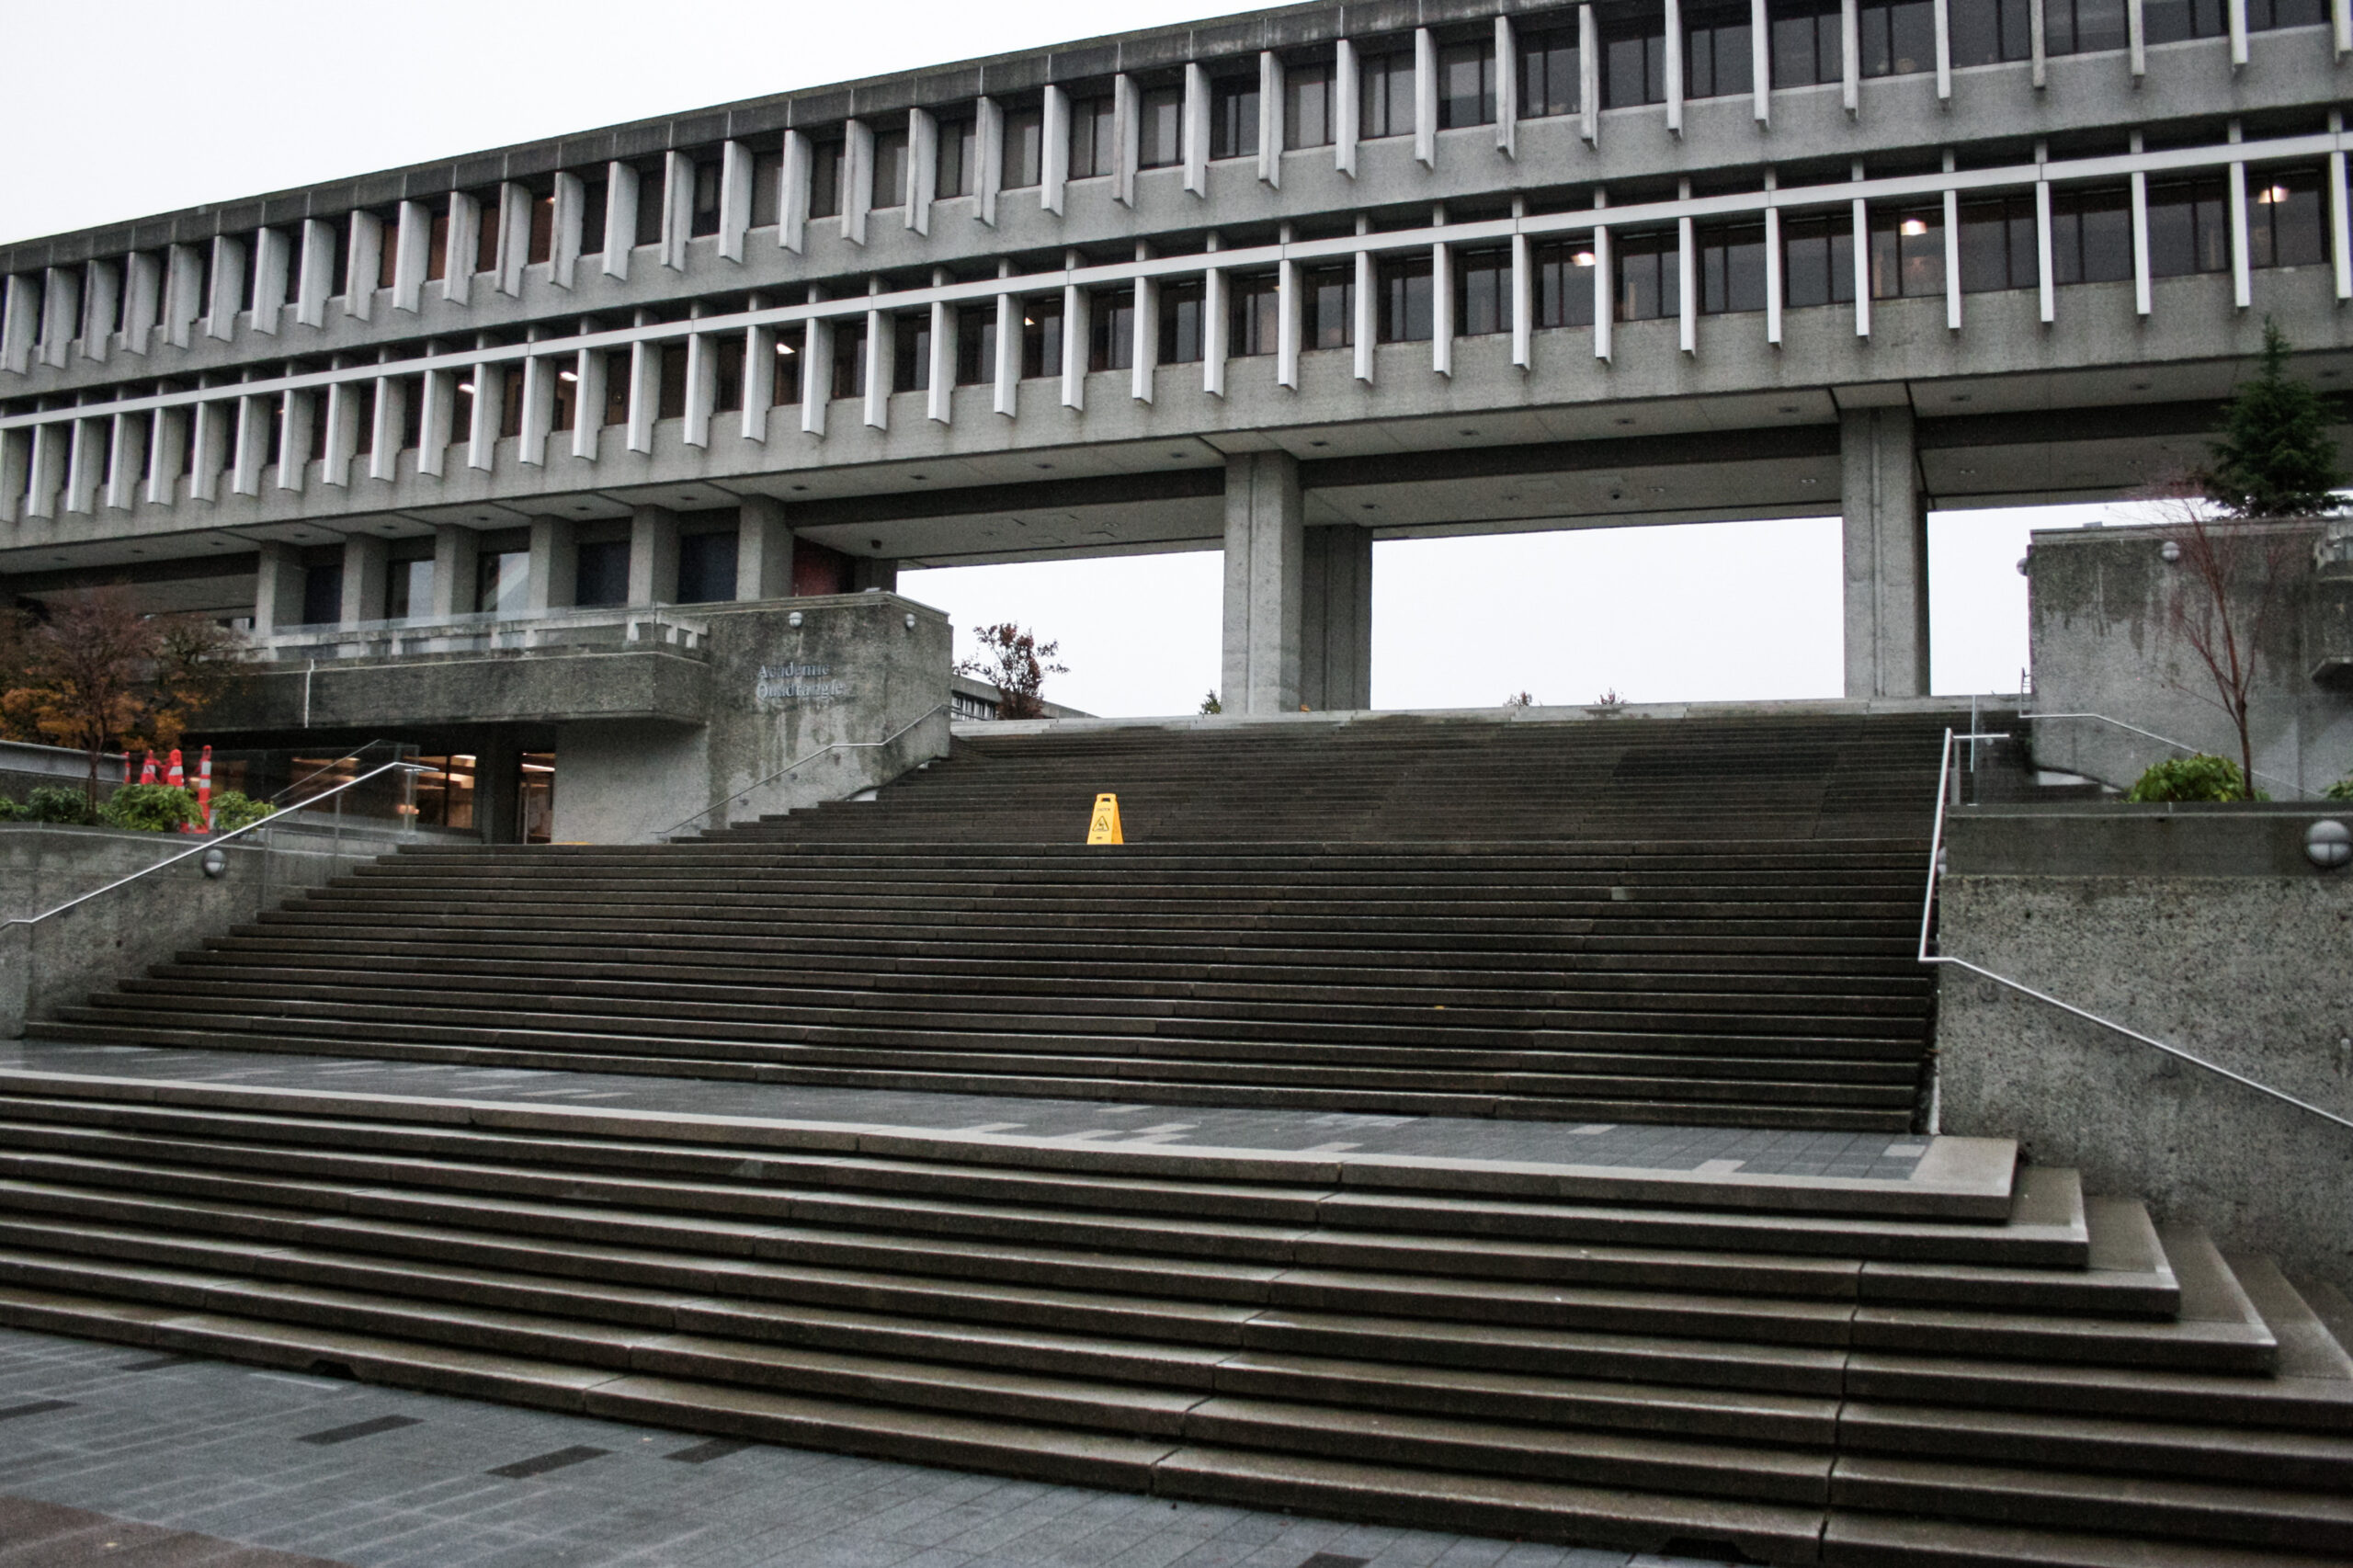 The photo is of the outdoor staircase leading into Convocation Mall at SFU Burnaby. The Academic Quadrangle can be seen.